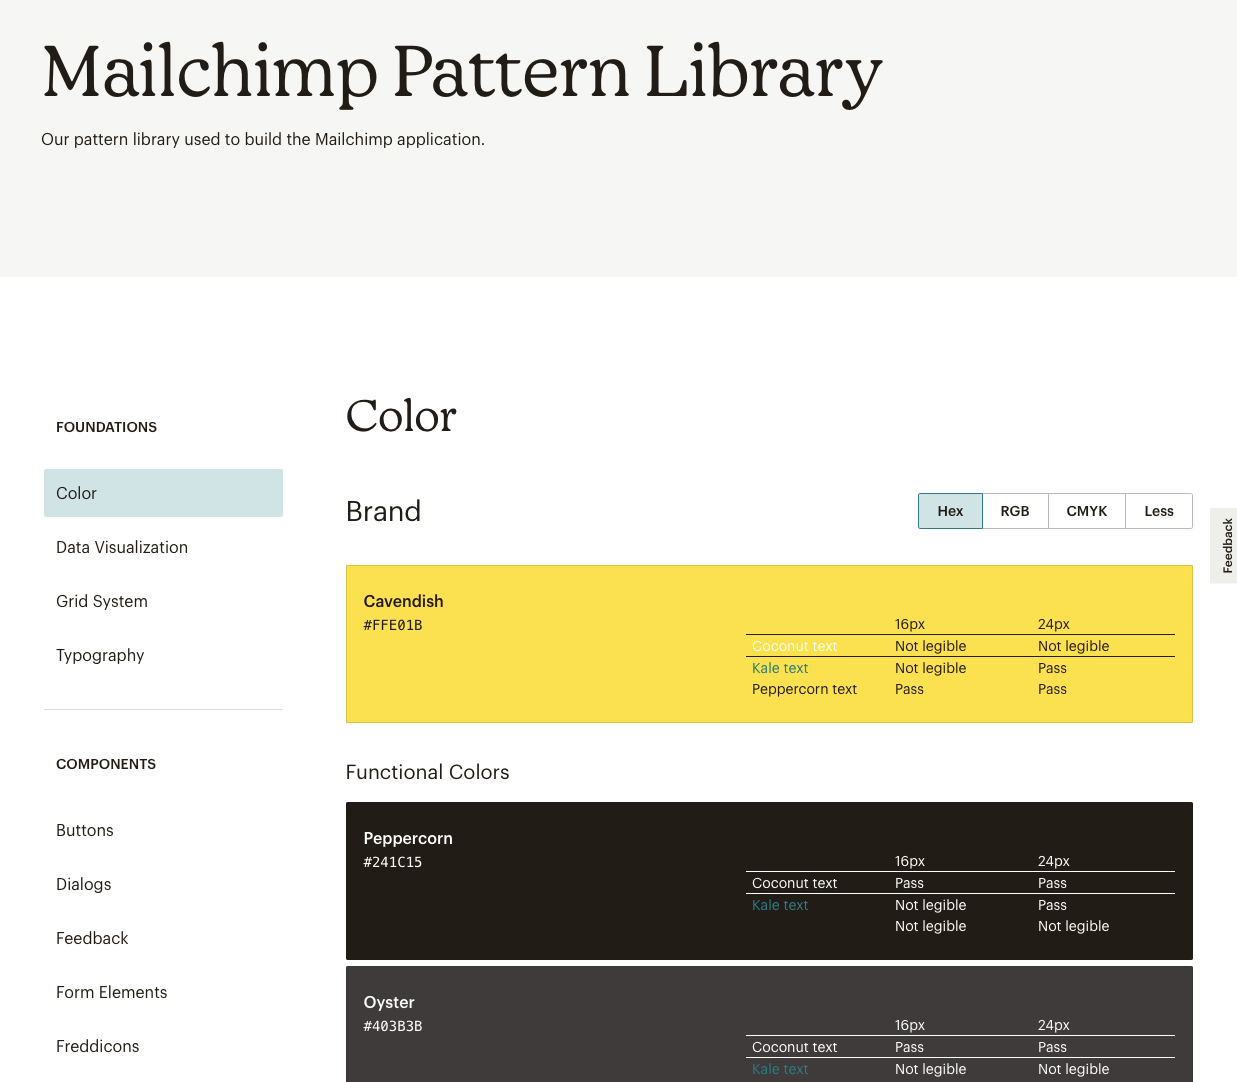 Mailchimp design system can teach us a lot about building long-lasting design systems